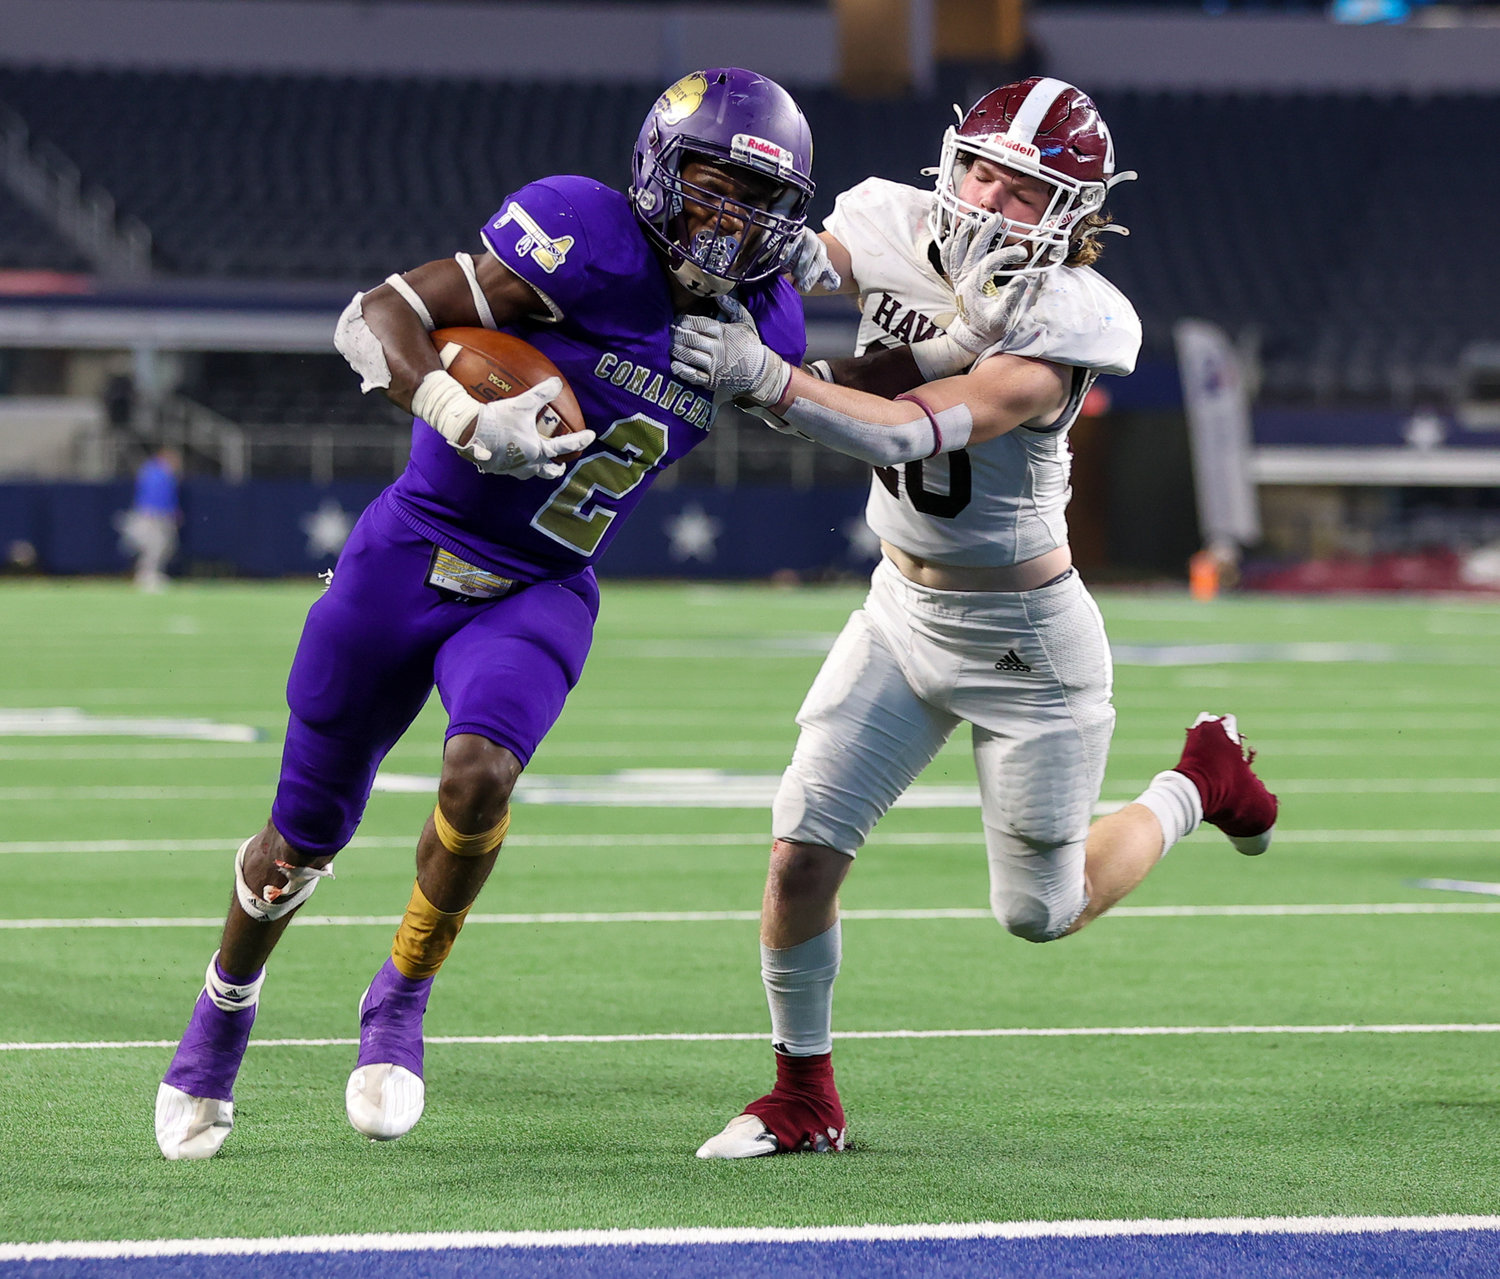 Shiner Comanches junior Dalton Brooks (2) fends off Hawley Bearcats sophomore Westyn Balch (20) on a touchdown carry during the Class 2A Division I state football championship game between Shiner and Hawley on December 15, 2021 in Arlington, Texas.